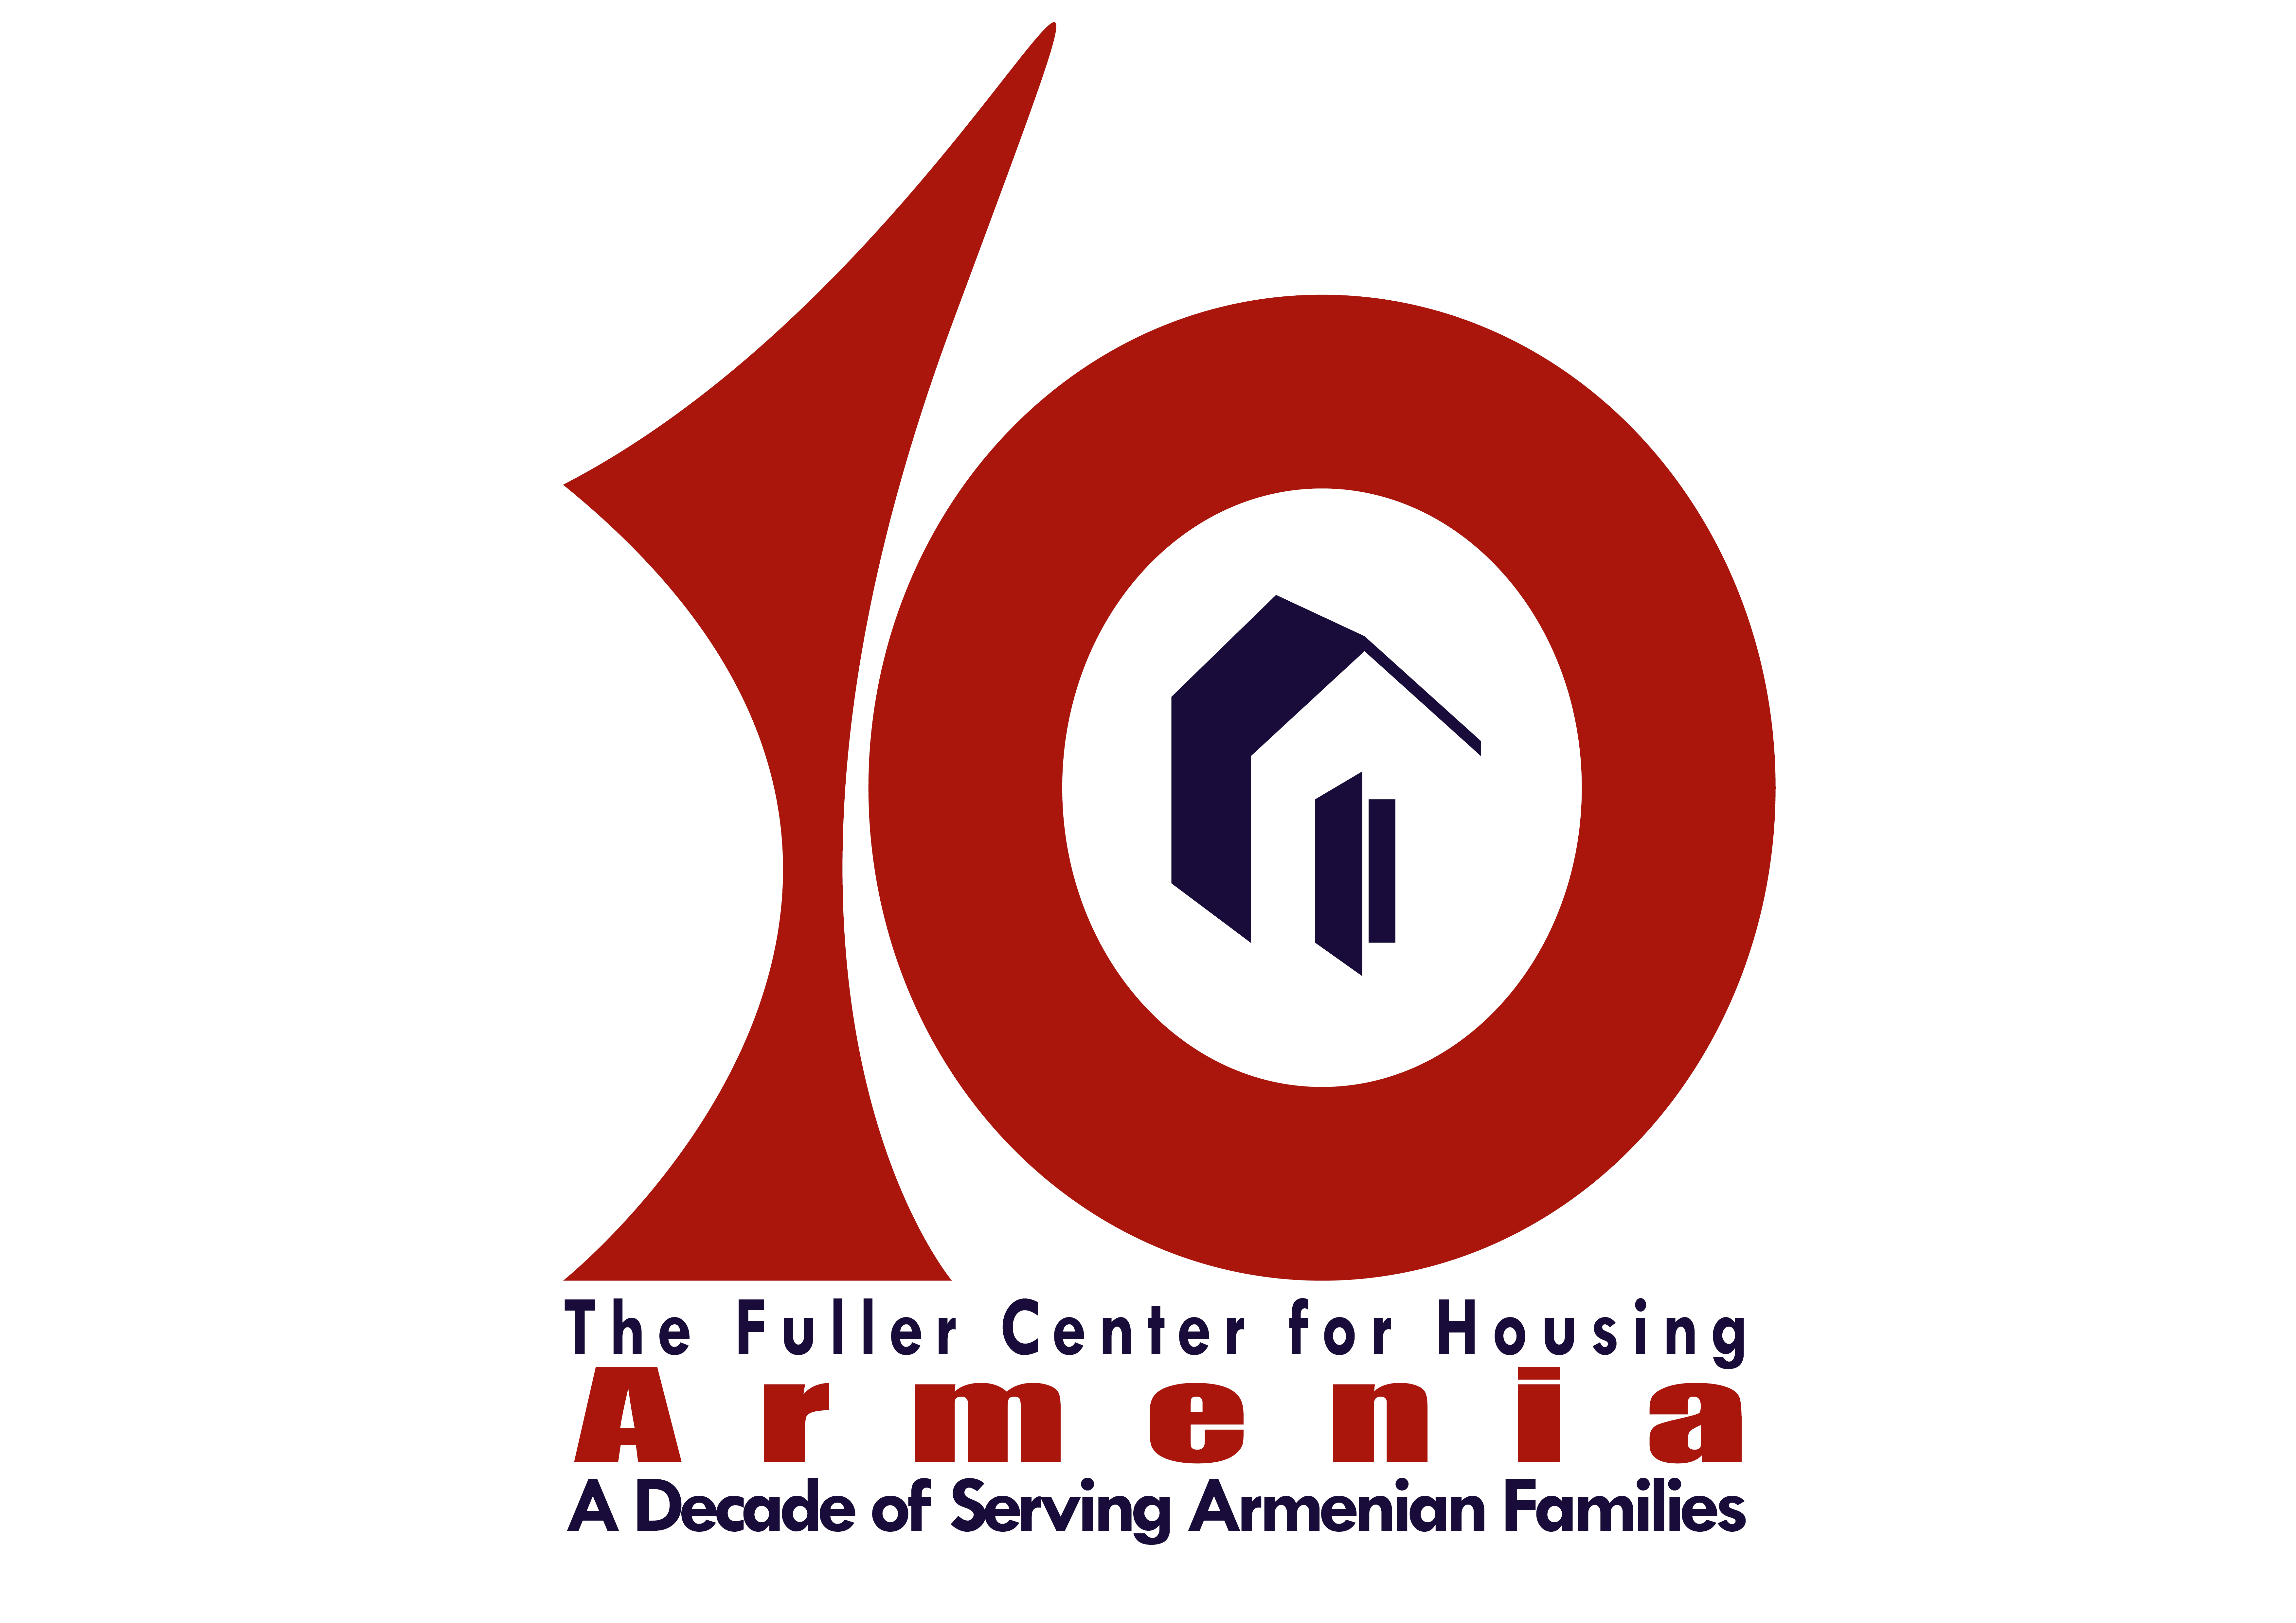 Deserving Life for 10 Families in Need of Decent Housing  towards 10th Anniversary